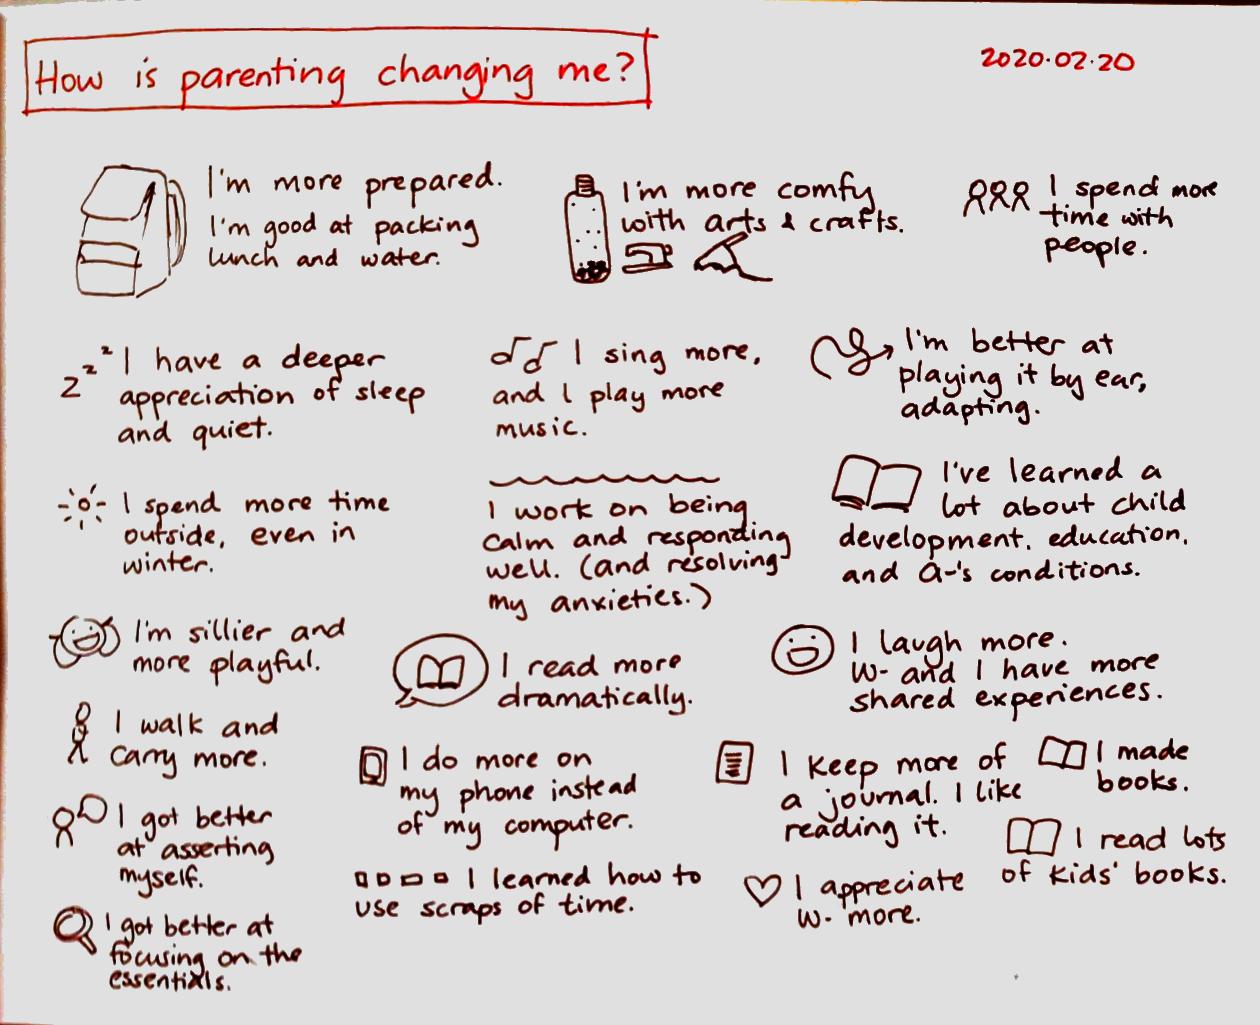 2020-02-20 How is parenting changing me #parenting.jpg